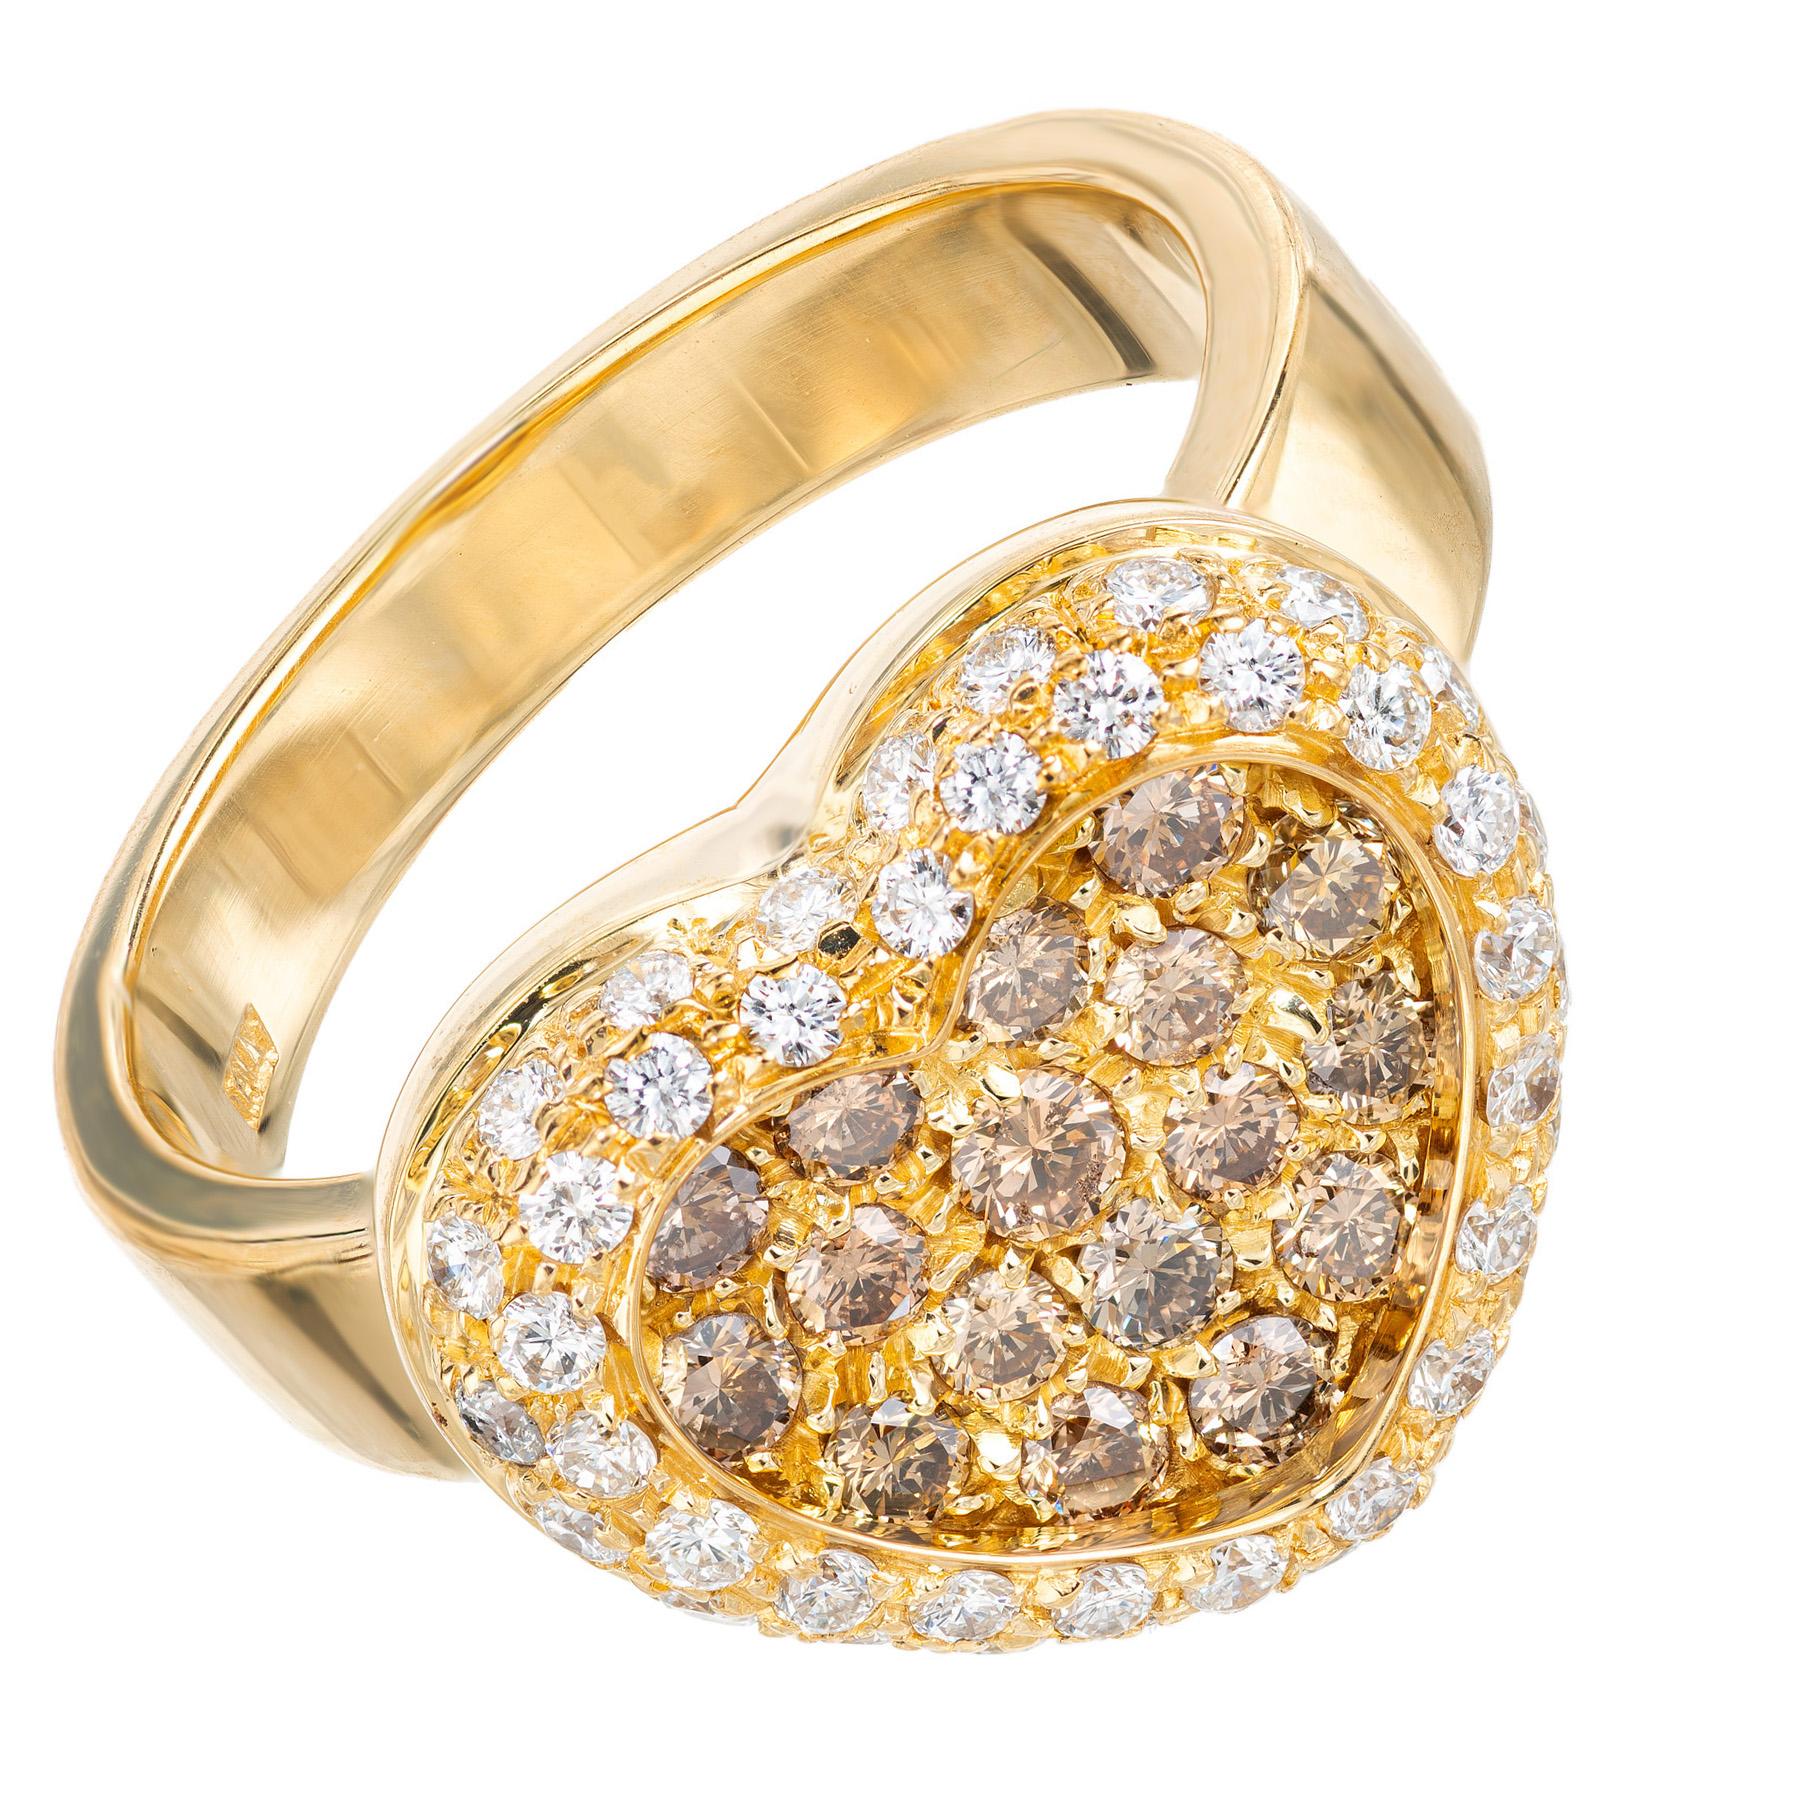 Beautiful well-made diamond heart ring in 18k yellow gold with 17 brown cognac round diamonds accented by a halo of 42 round brilliant cut white diamonds. The contrast from the different color diamonds while being set in yellow gold creates a